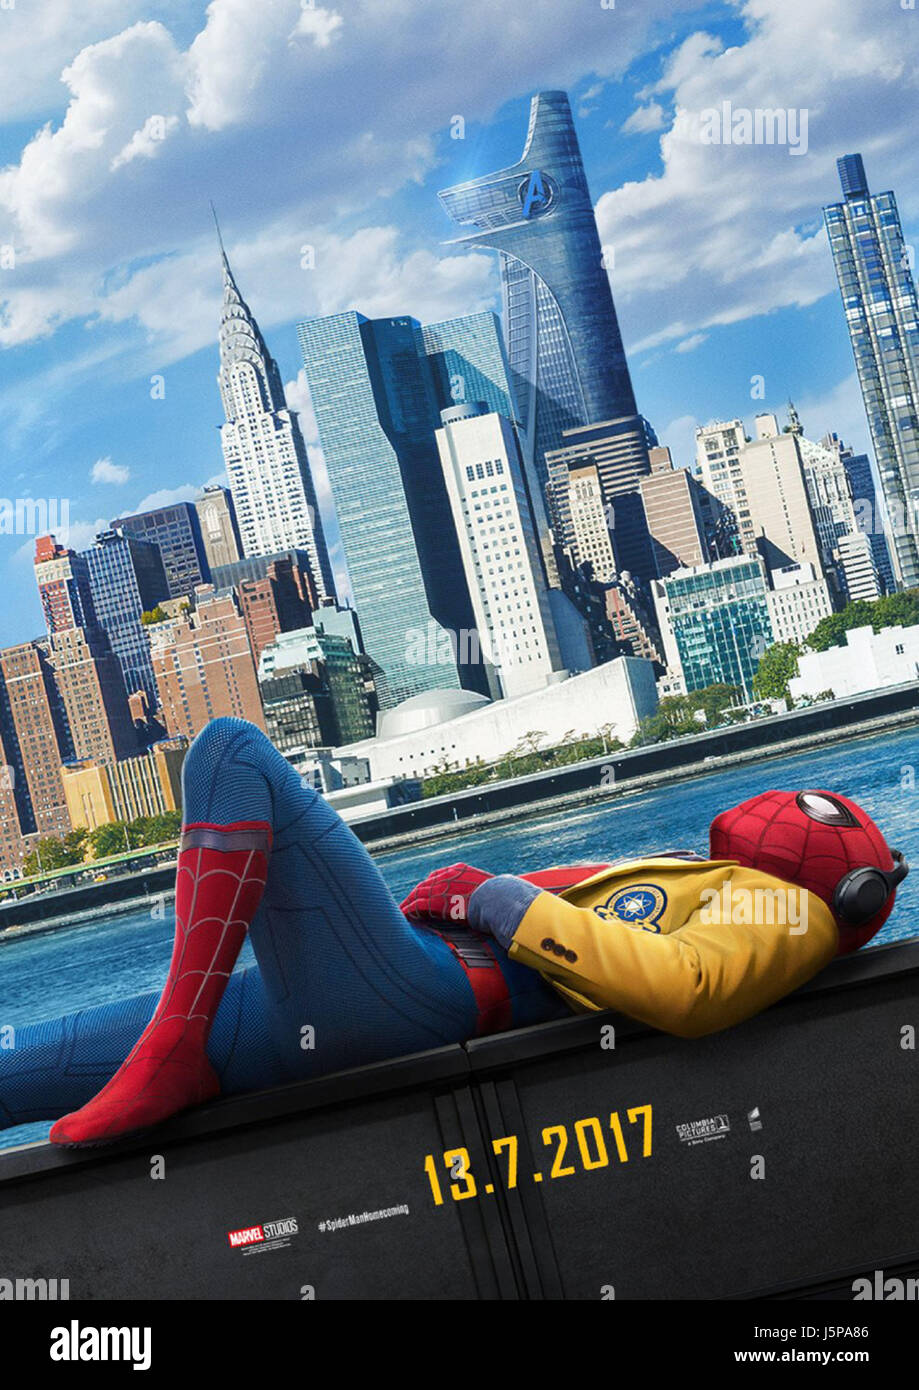 SPIDER-MAN : Homecoming (2017) JON WATTS (DIR) Marvel Studios/Columbia Pictures/COLLECTION MOVIESTORE LTD Banque D'Images